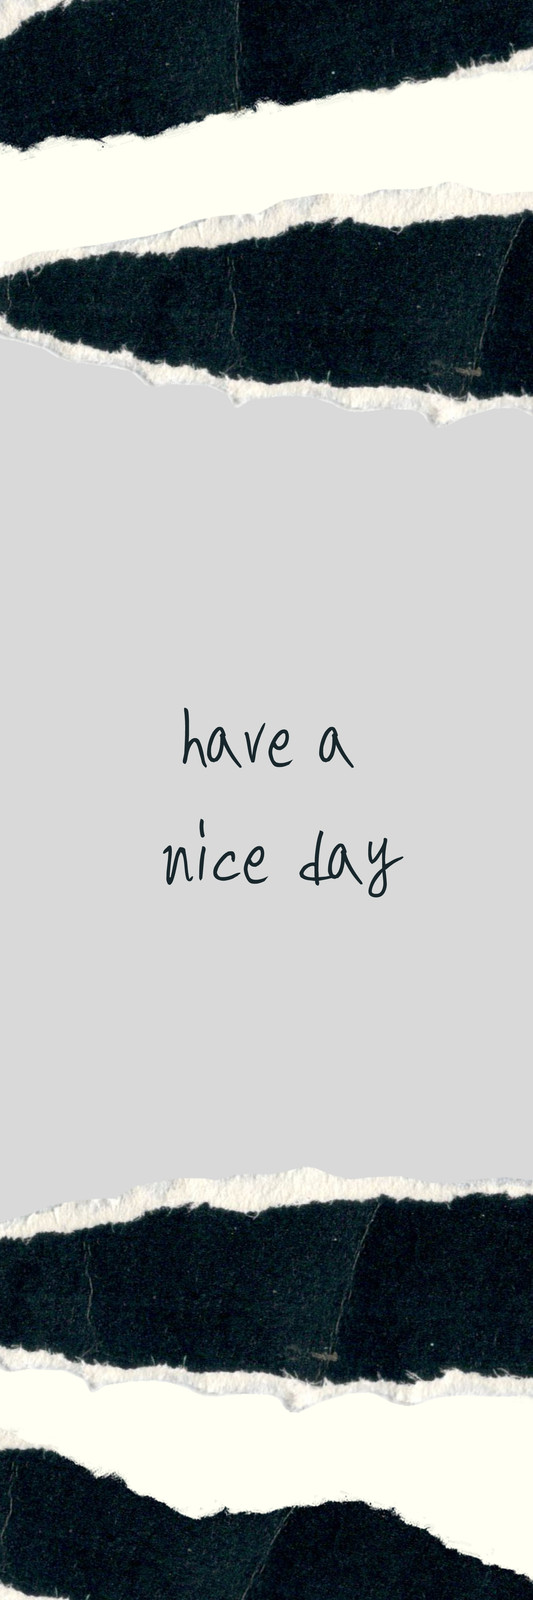 have a great day quotes tumblr